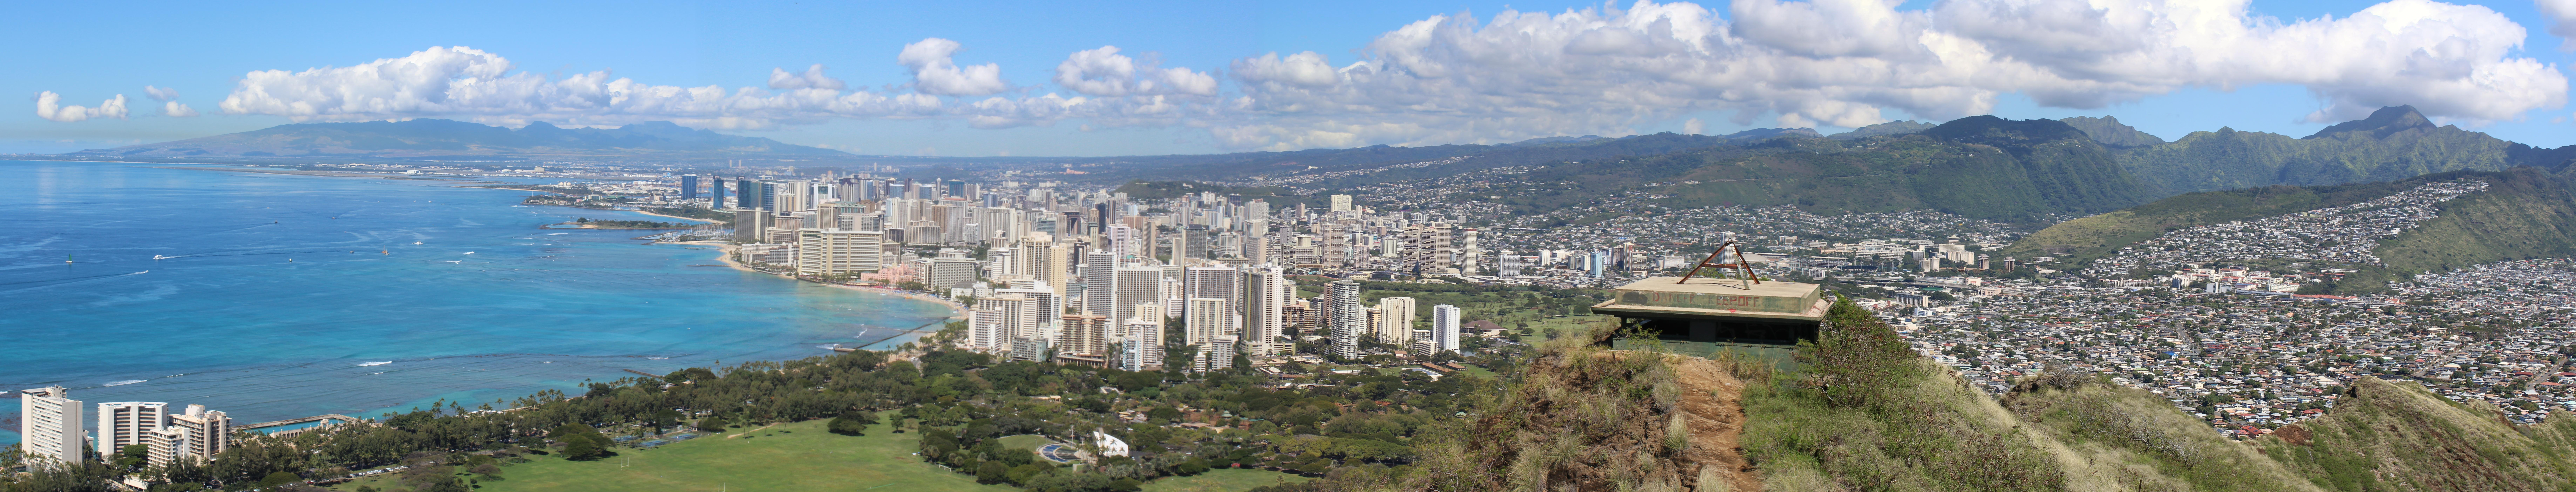 Panoramic view looking over Honolulu from the summit of Diamond Head.